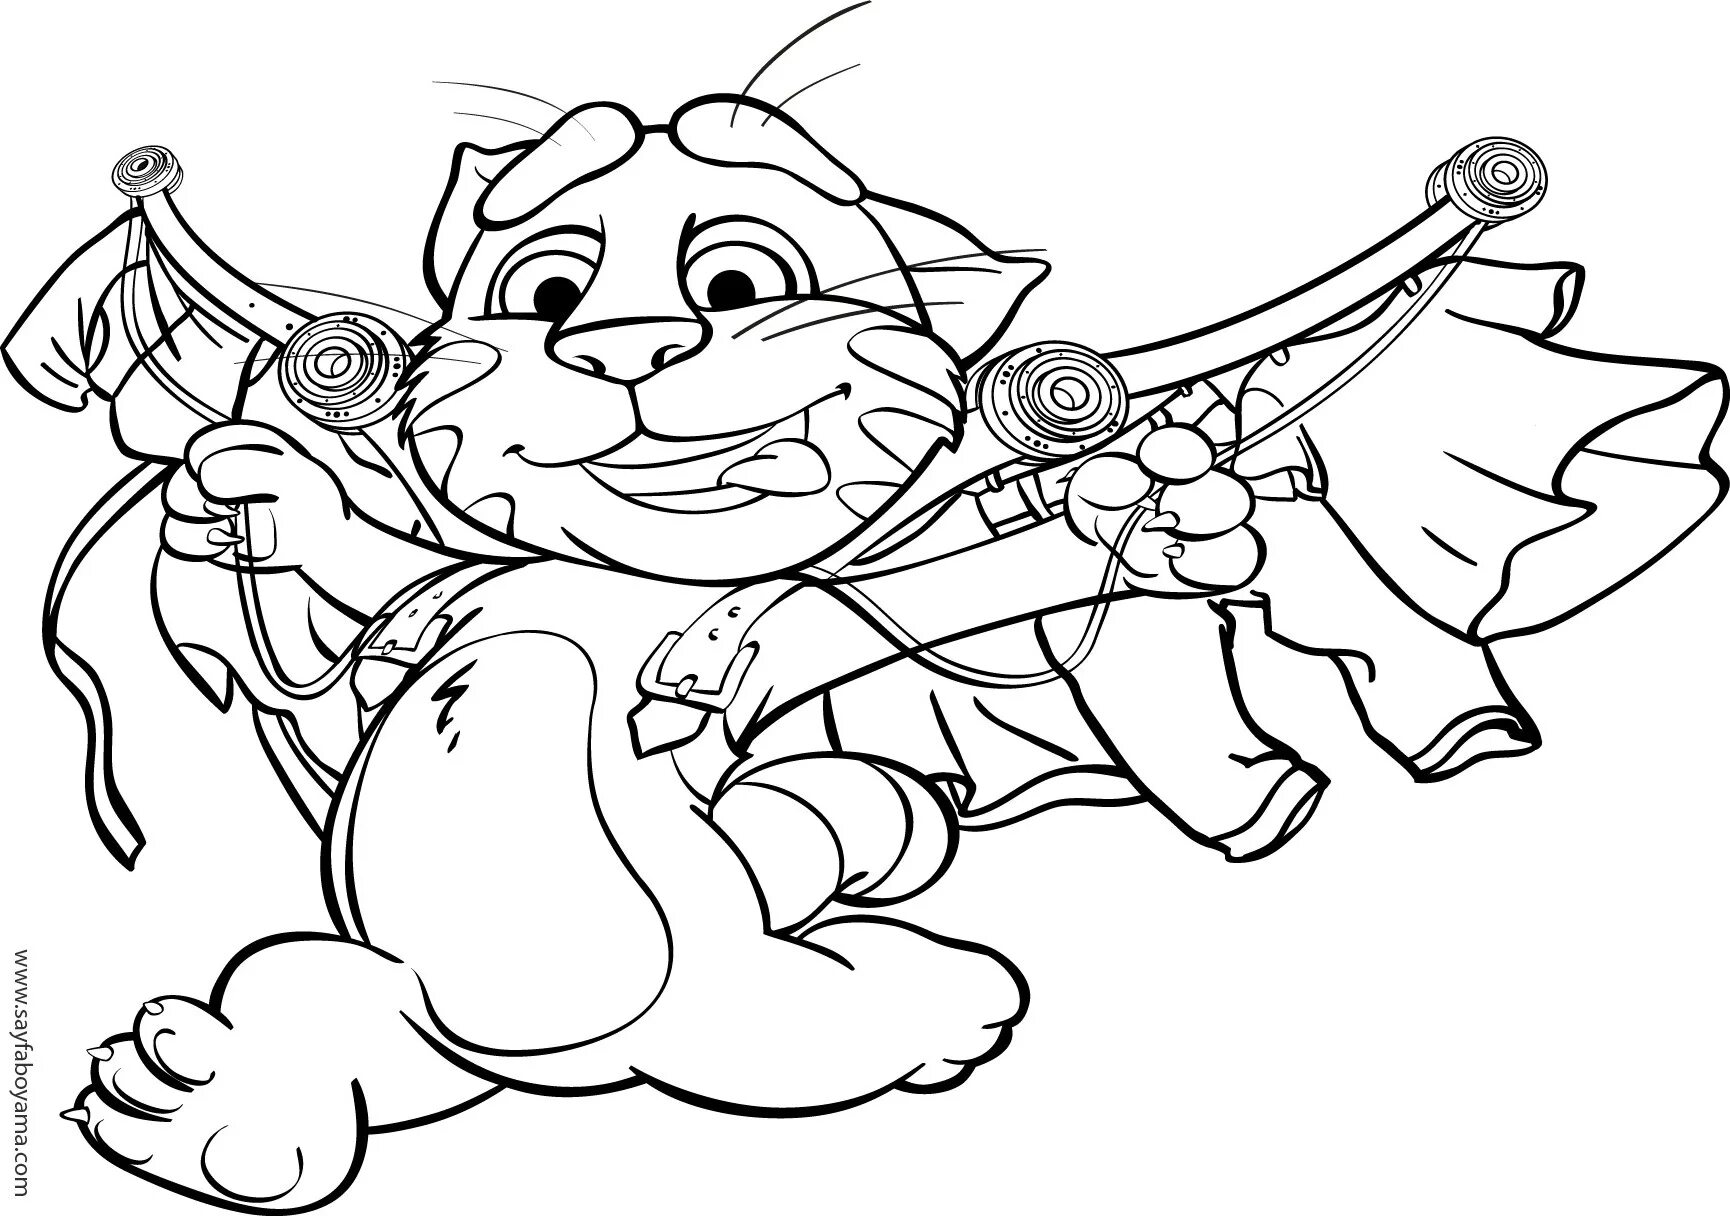 Luxury Gold Run coloring page